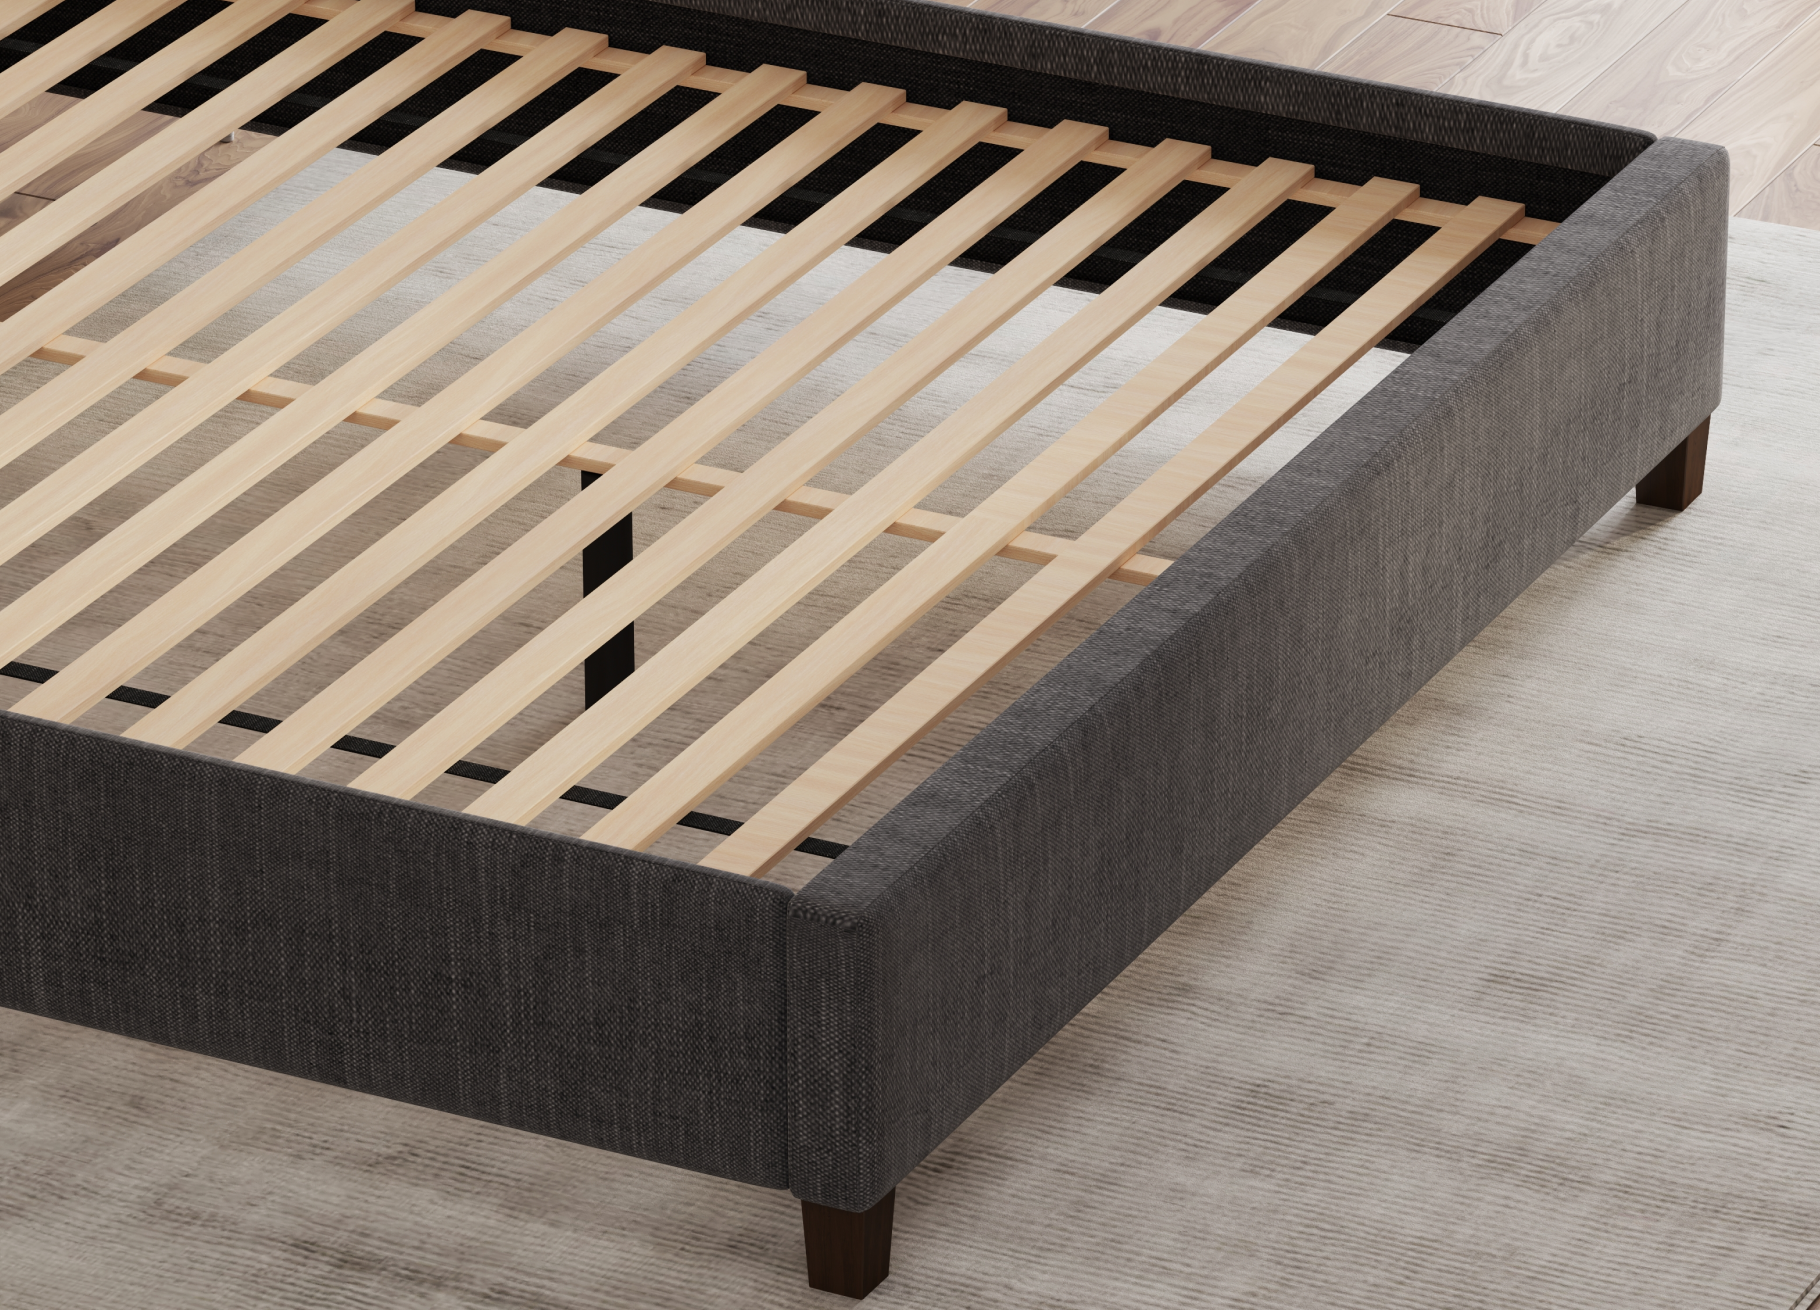 Showcasing the center support of the Charcoal Upholstered Eastman Platform Bed - Mattress King